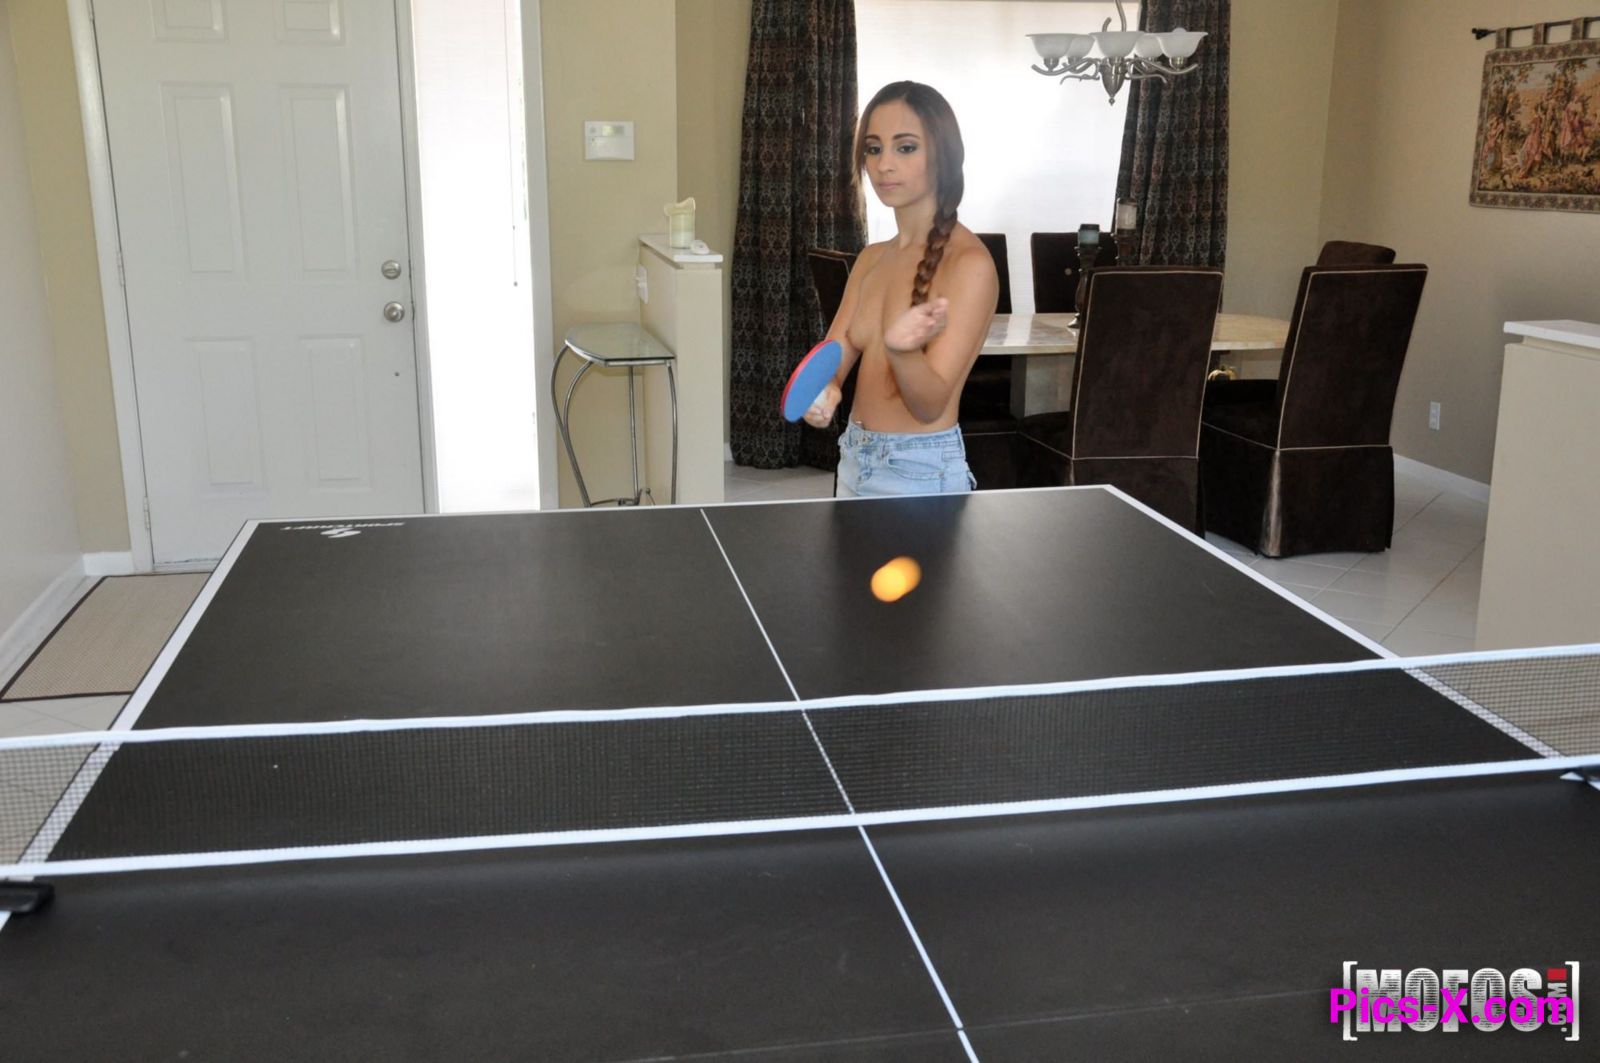 Sucking Balls at Table Tennis - I Know That Girl - Image 11